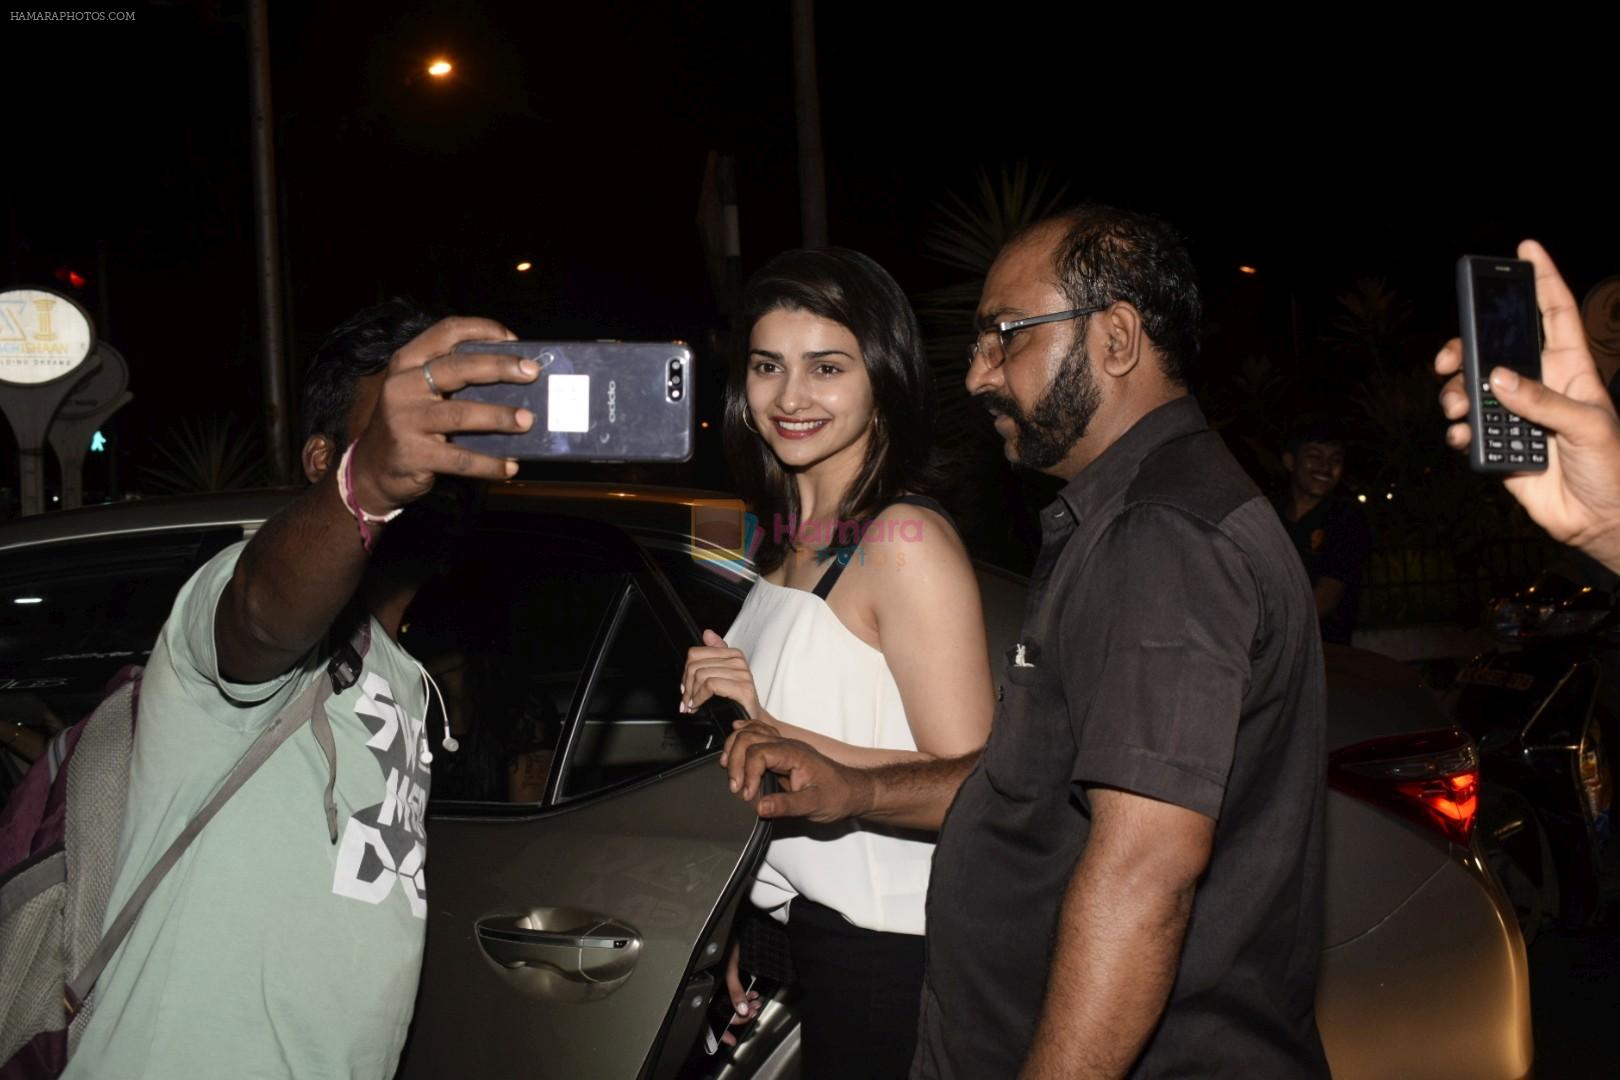 Prachi Desai Spotted At Bastian In Bandra on 21st Oct 2018